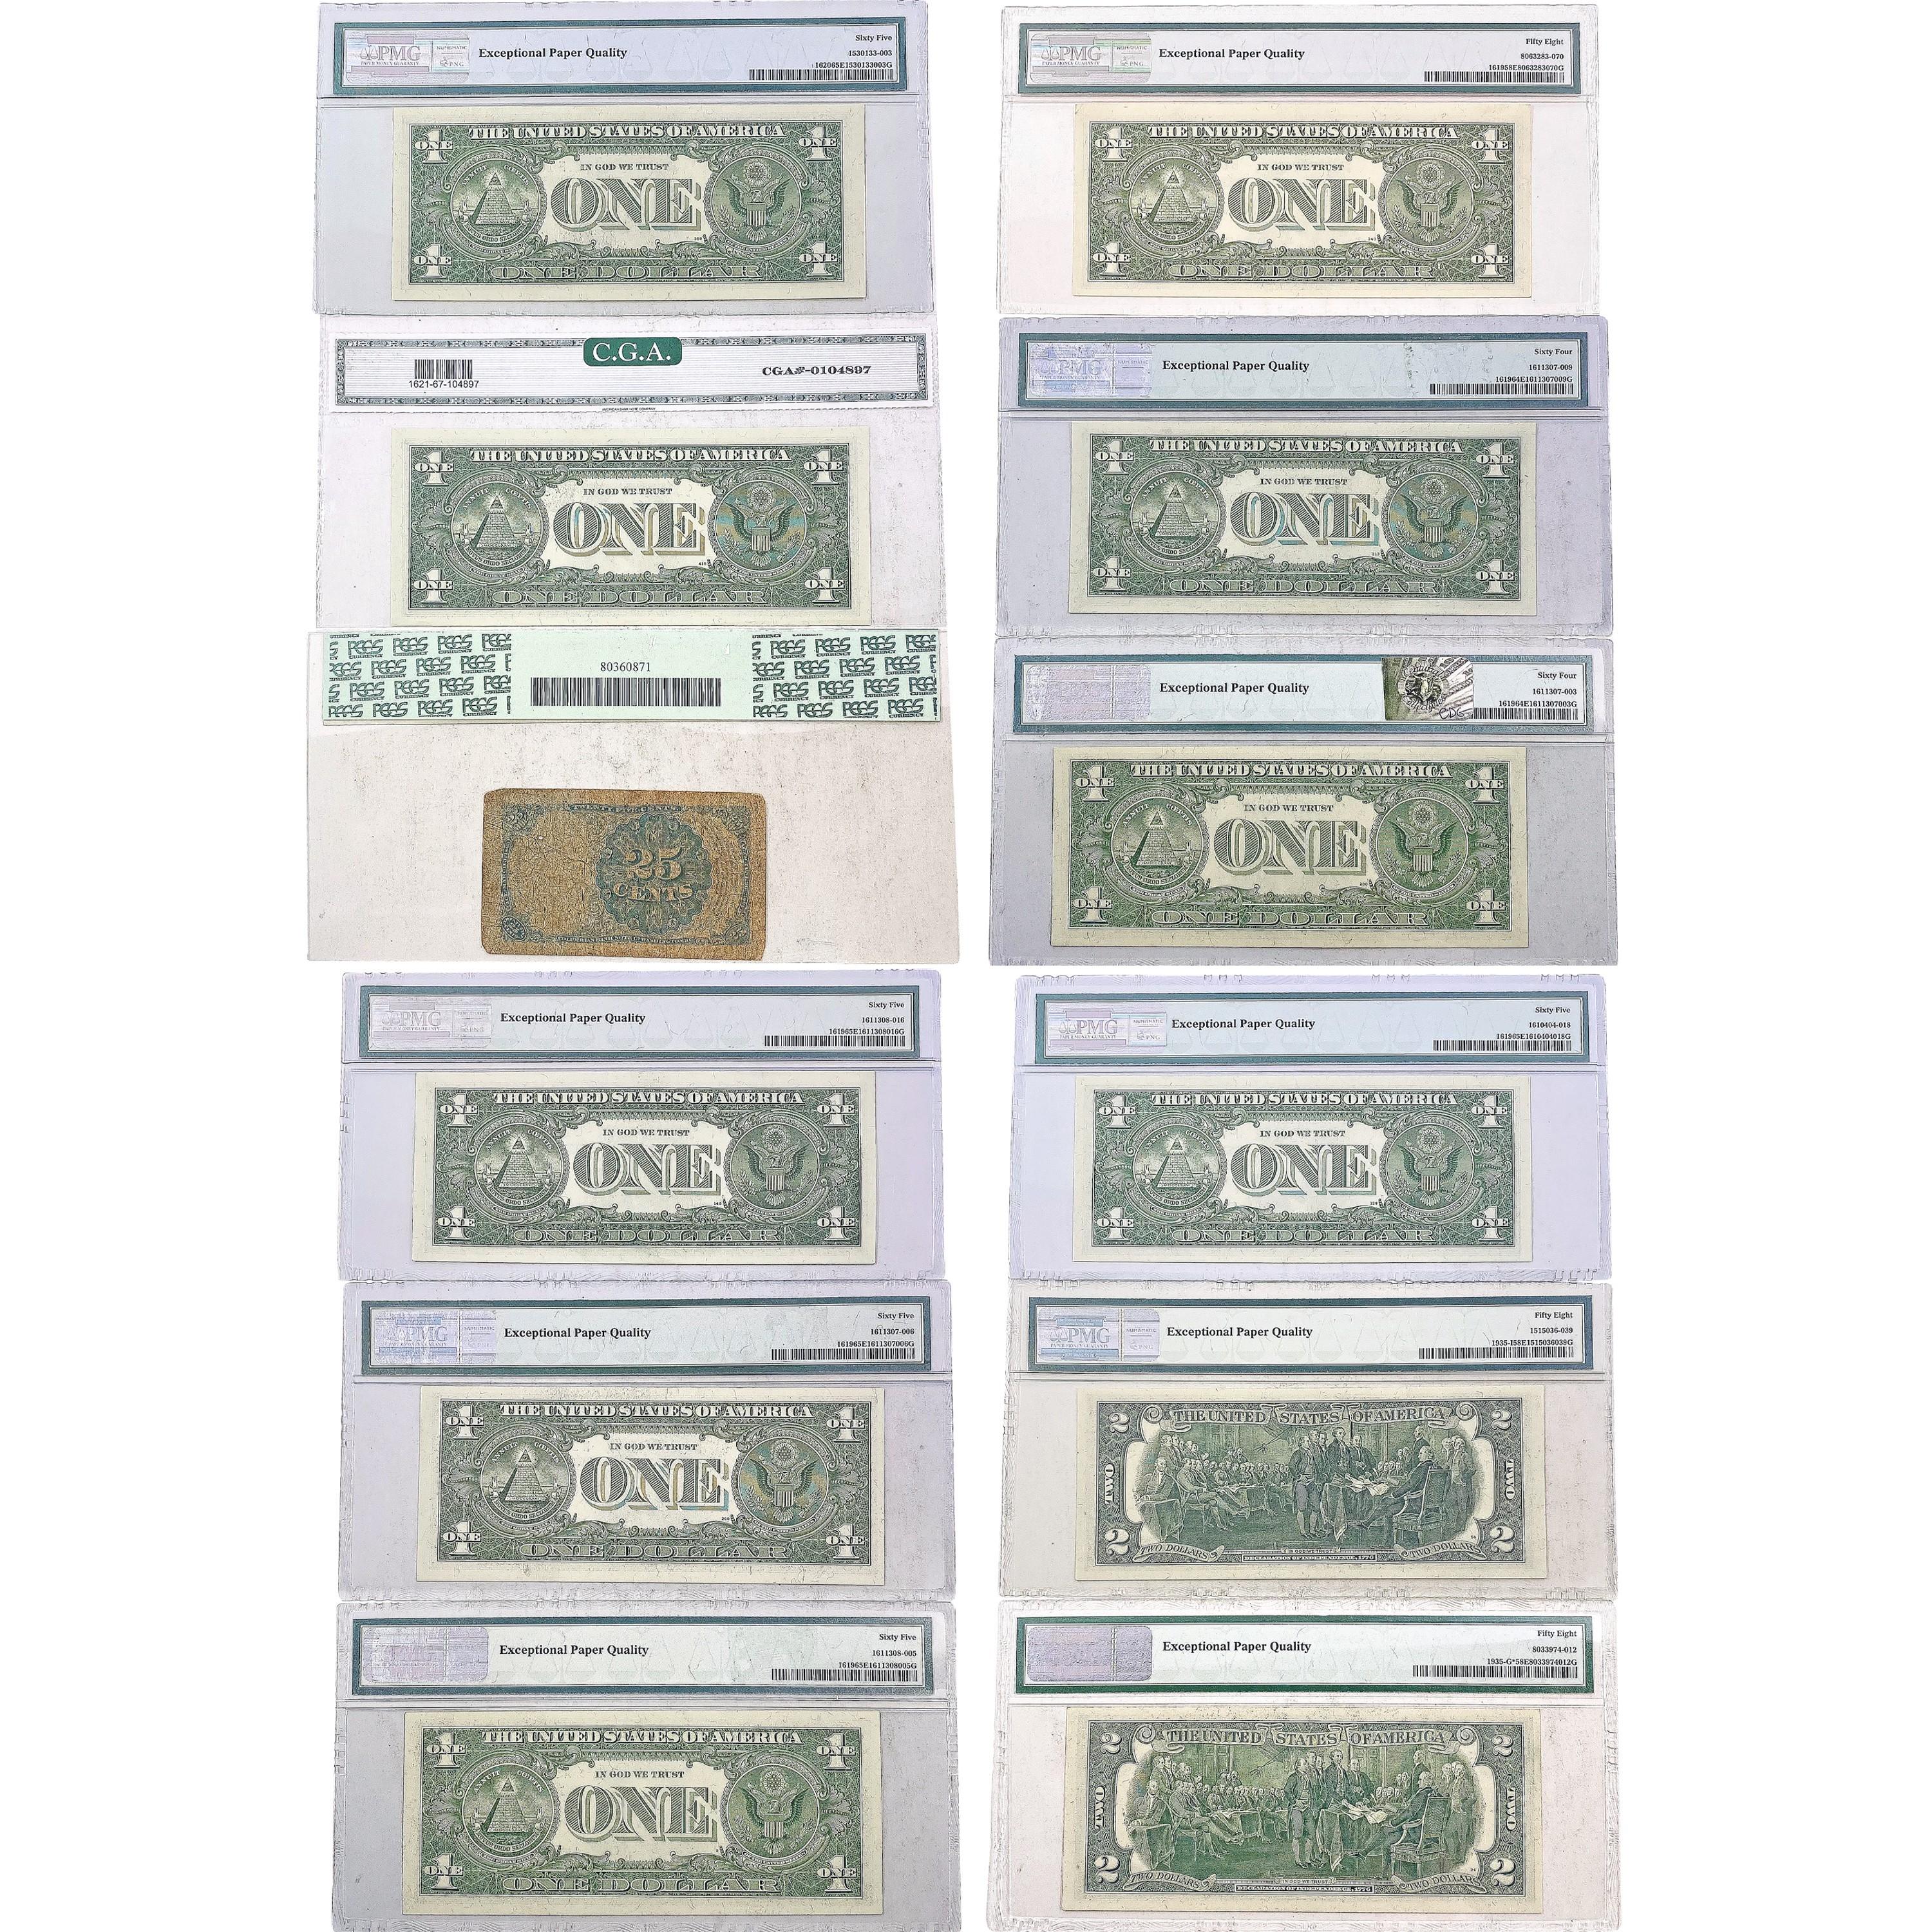 1874-2003 M Varied US Currency Graded and Raw [51 Bills] PMG,PCGS VG-MS 8-67